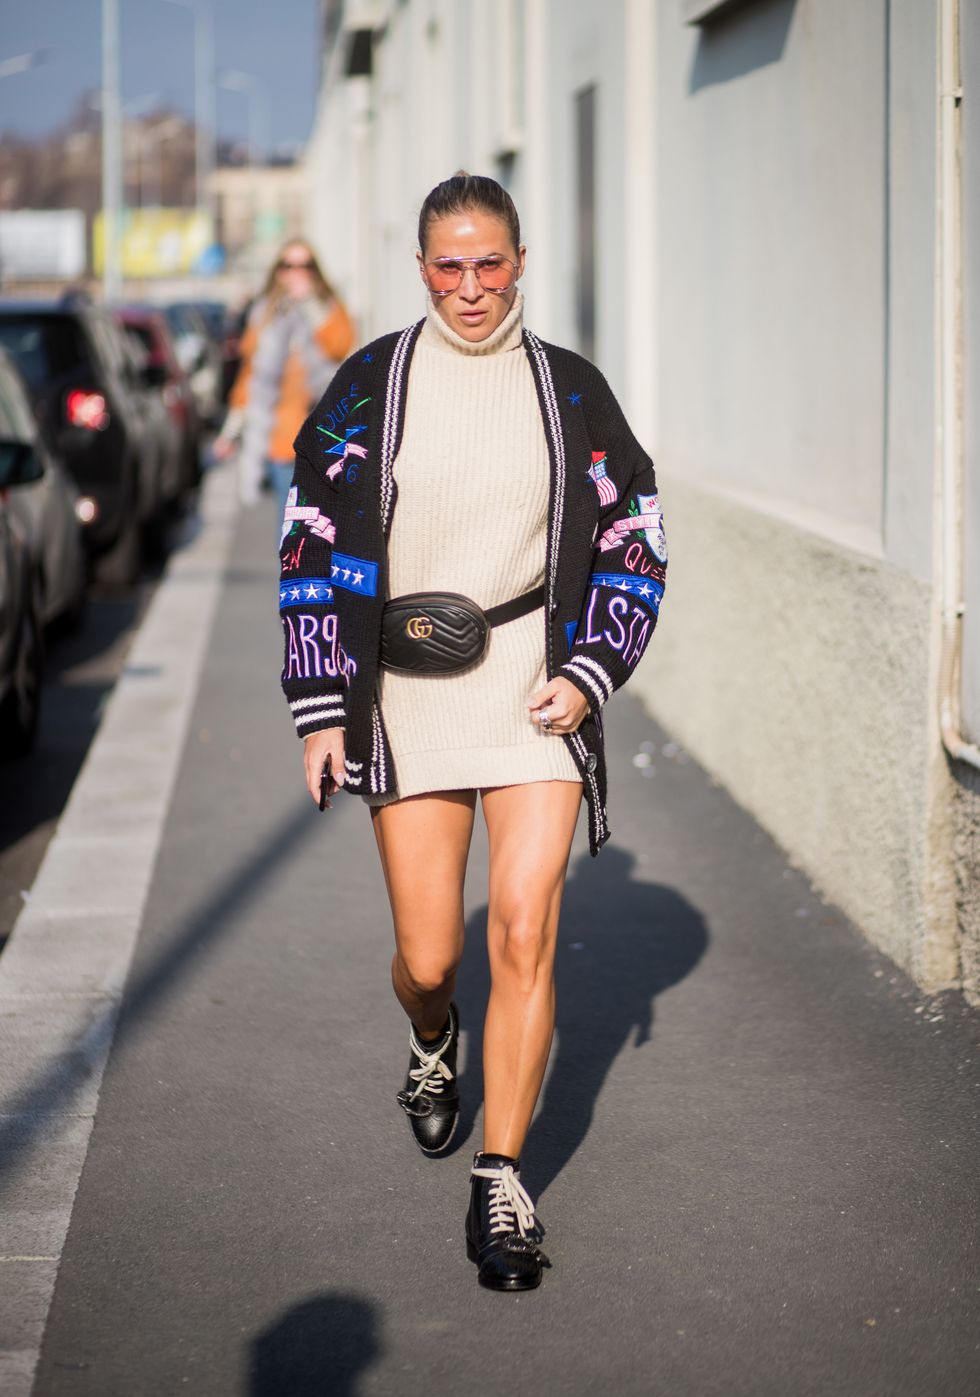 MILAN, ITALY - JANUARY 14: A guest wearing cardigan, Gucci belt, creme turtleneck knit is seen outside DSquared2 during Milan Men's Fashion Week Fall/Winter 2018/19 on January 14, 2018 in Milan, Italy. (Photo by Christian Vierig/Getty Images)